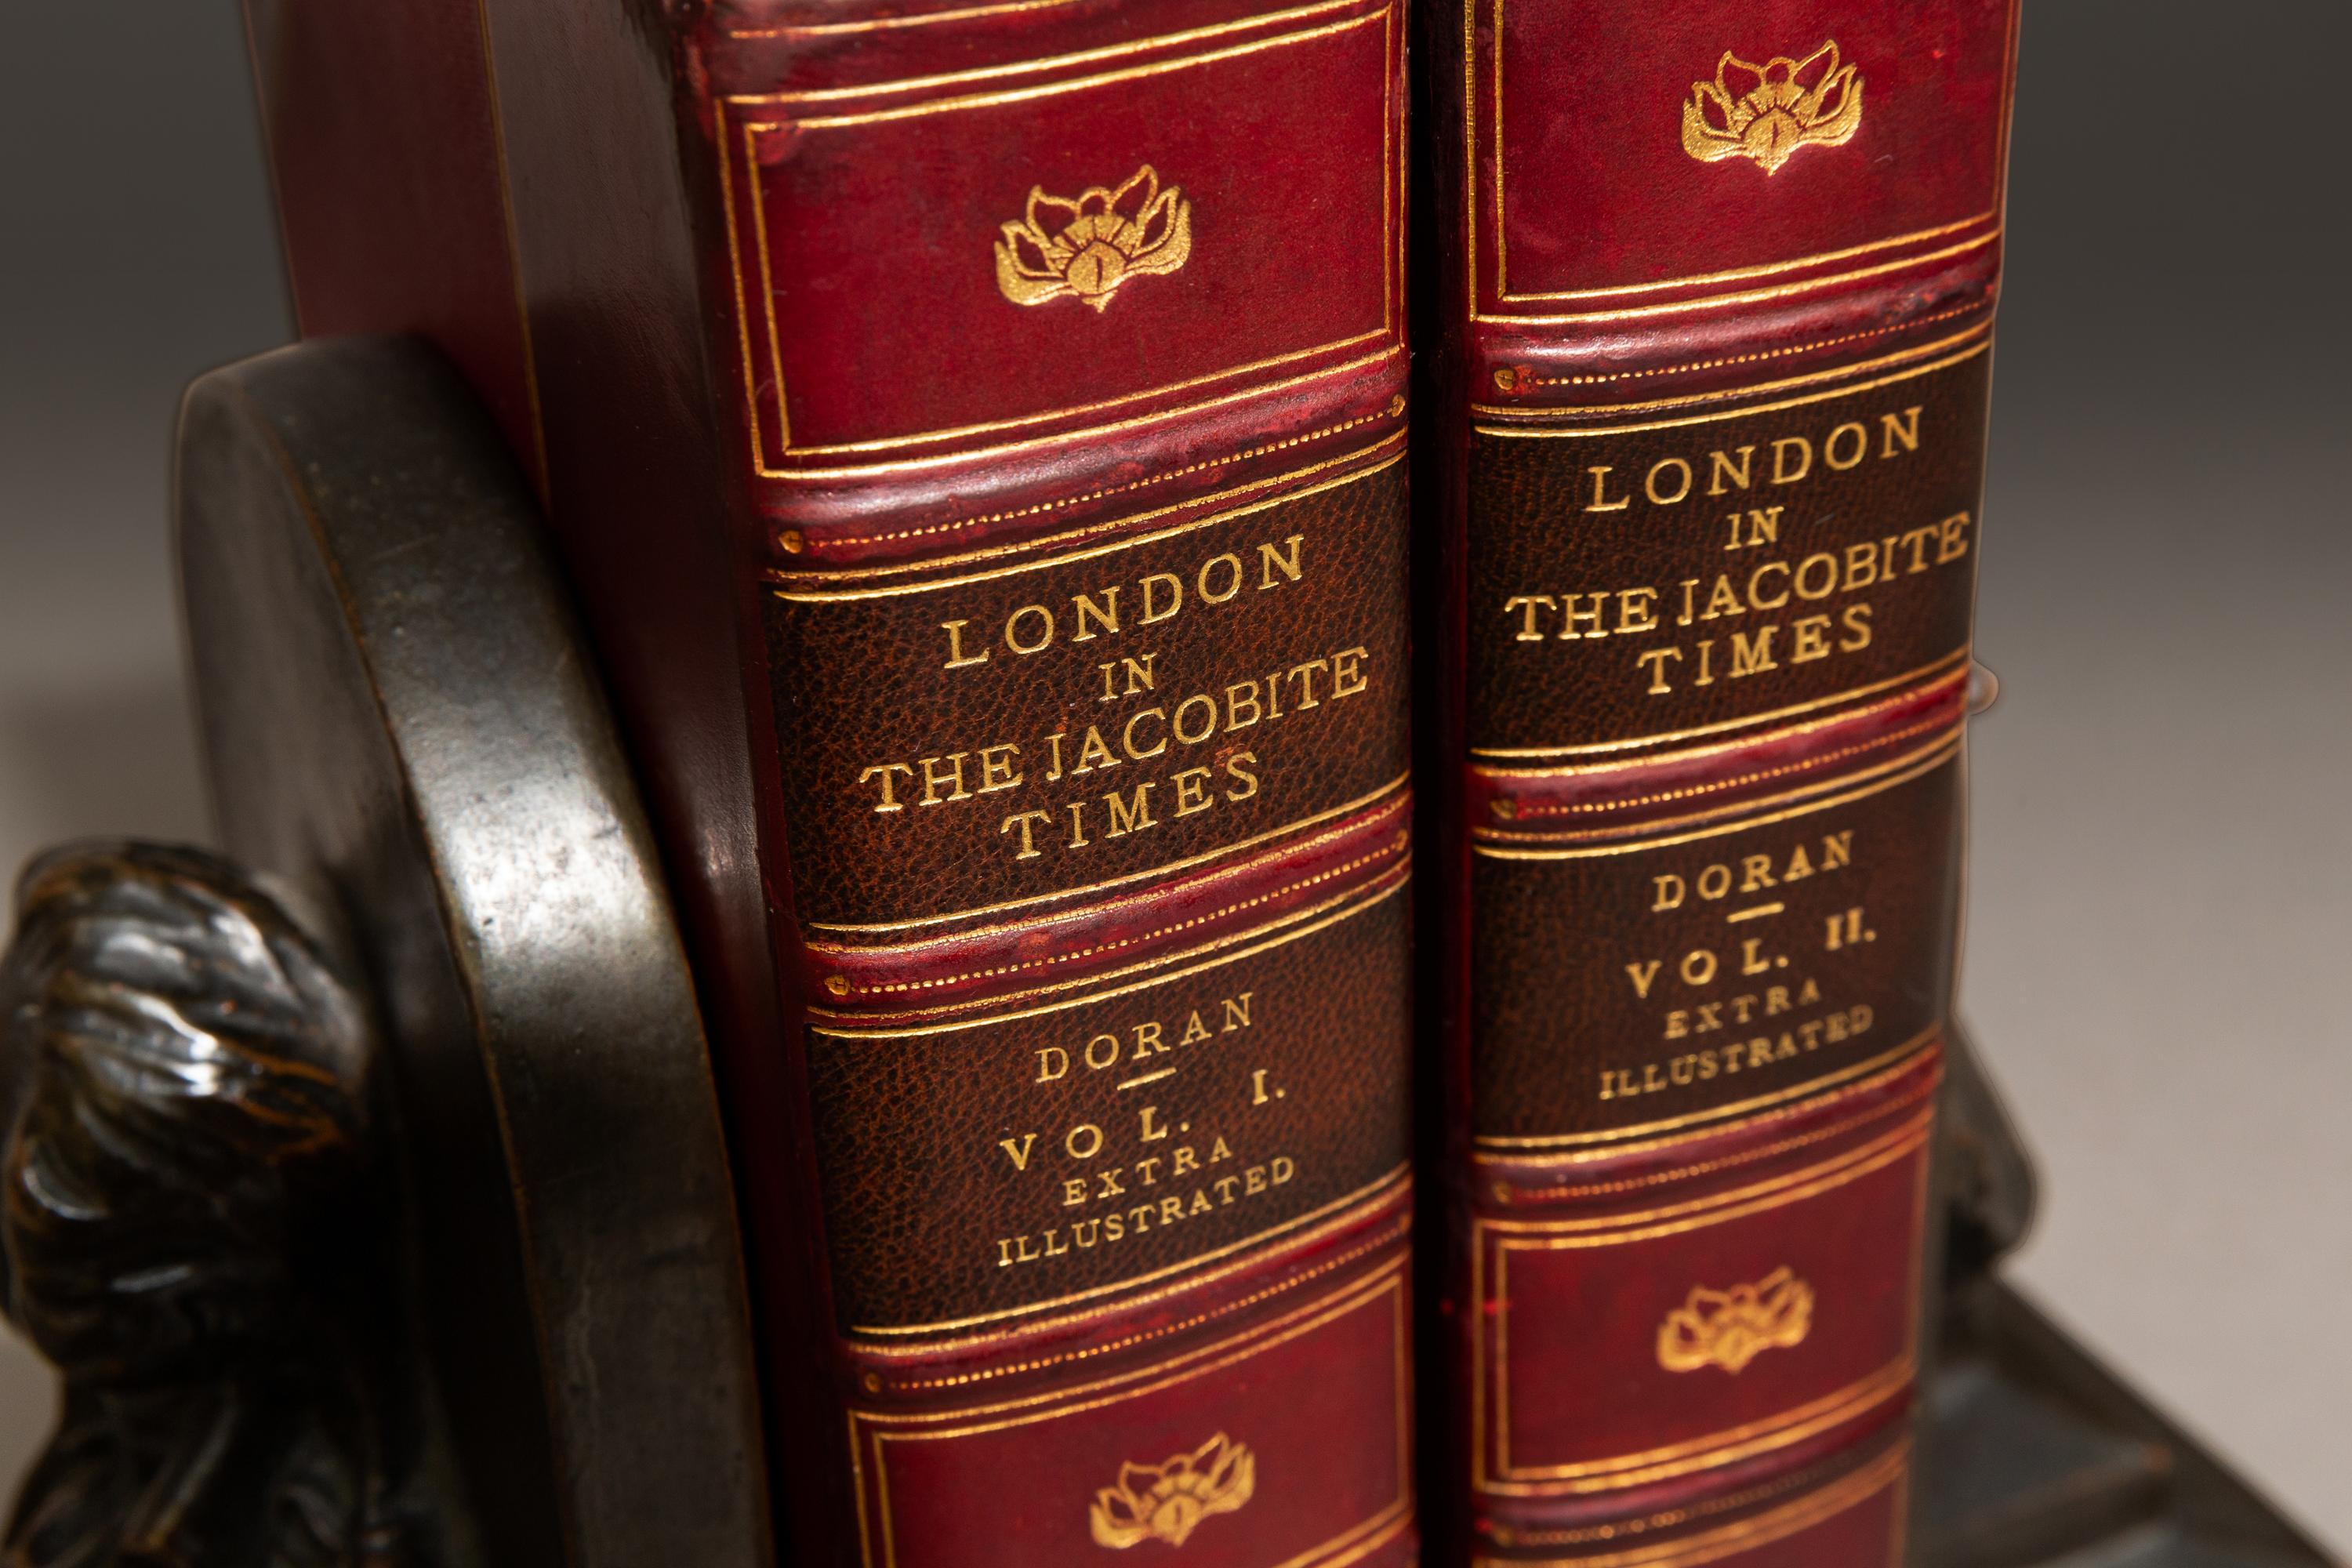 19th Century 2 Volumes, Dr. Doran, London in the Jacobite Times